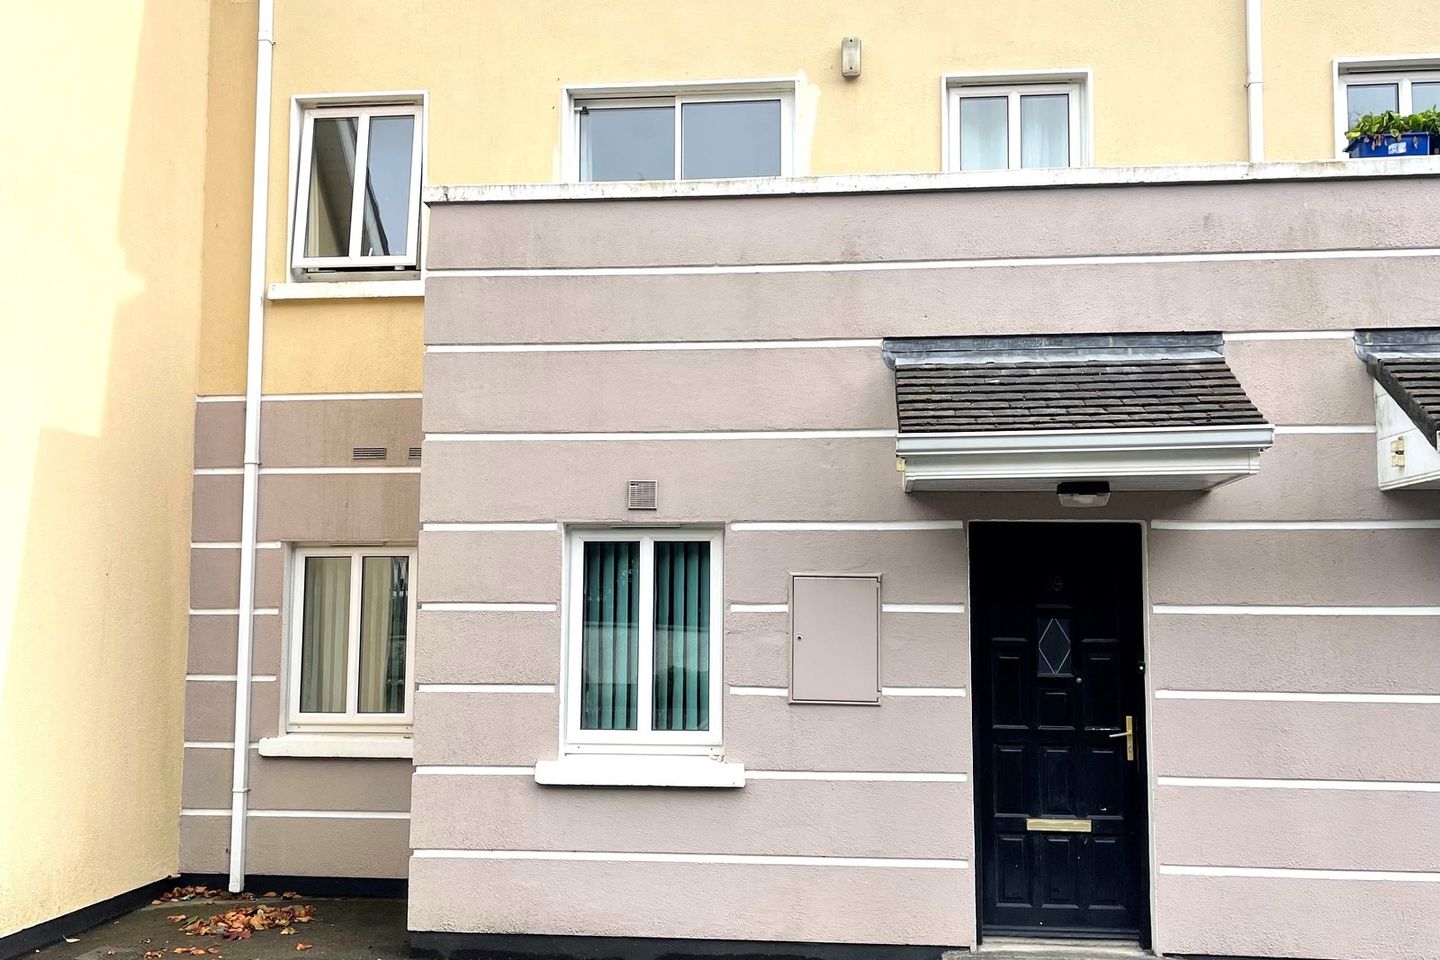 39 Gleann Noinin, College Road, Galway City, Co. Galway